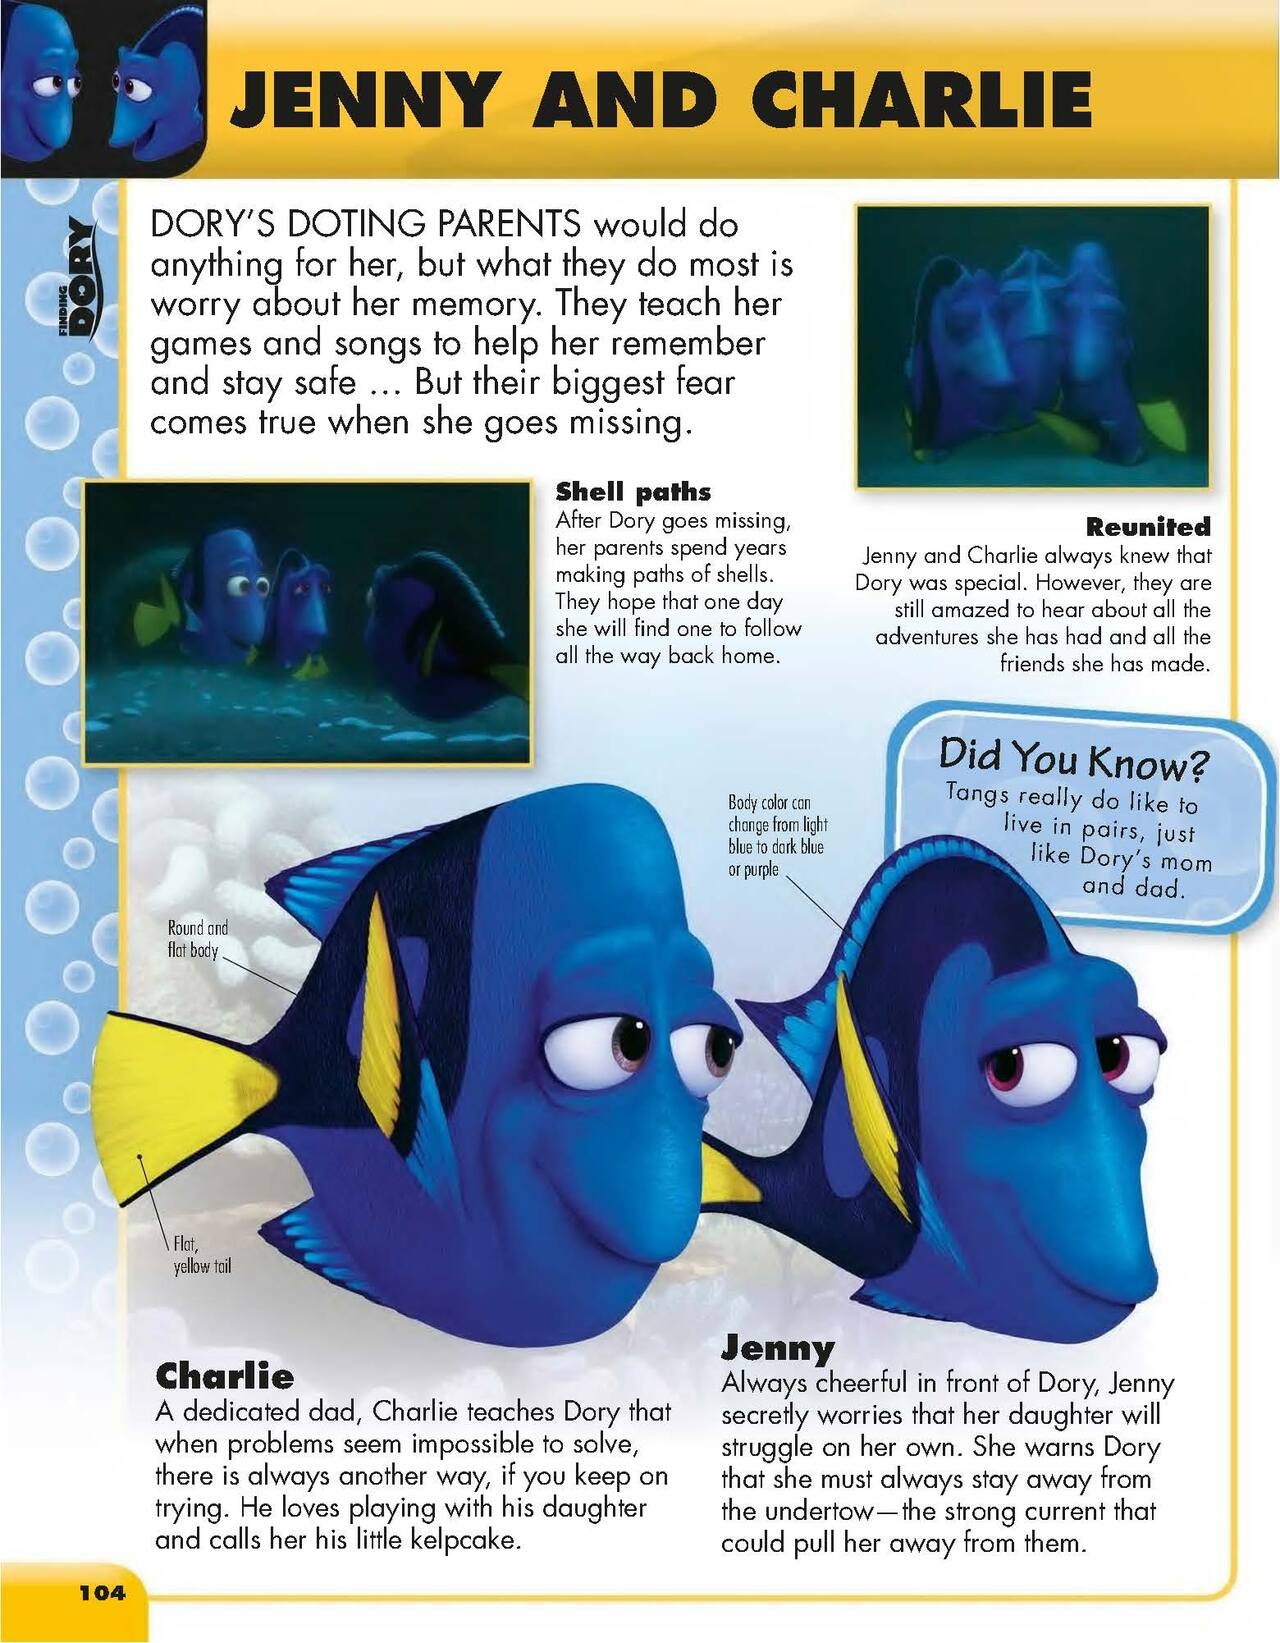 Disney Pixar Character Encyclopedia Updated and Expanded 105